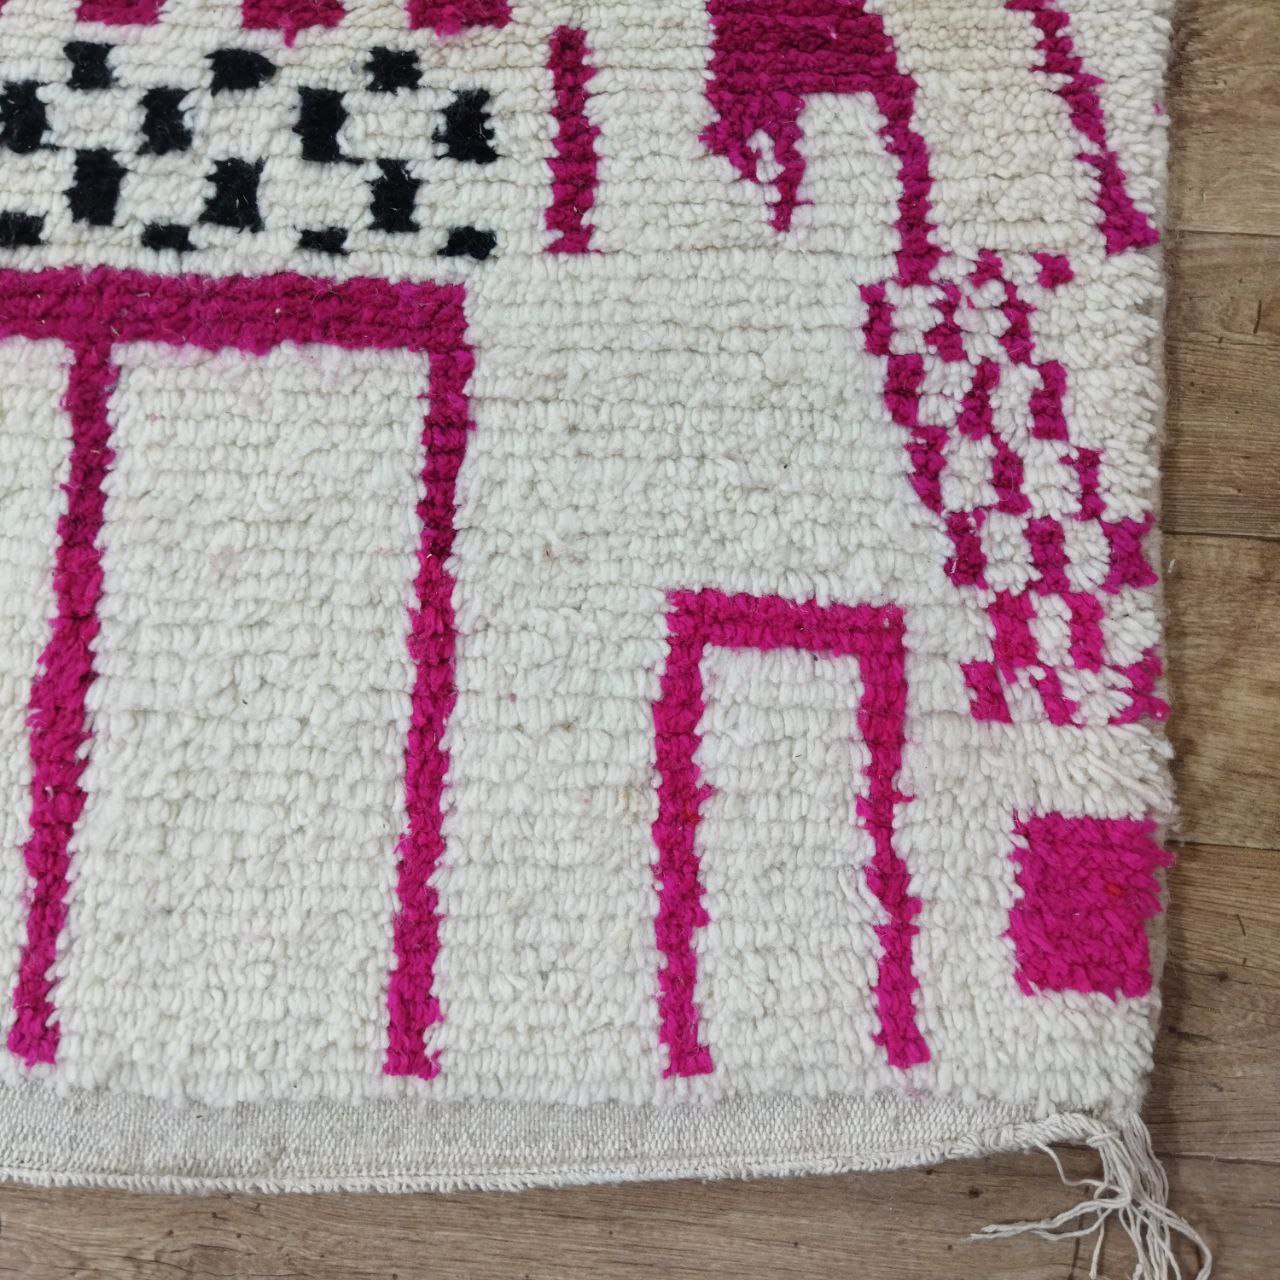 Exquisite Moroccan Berber Rugs - Discover the Artistry of Azilal in the Art of Love Style